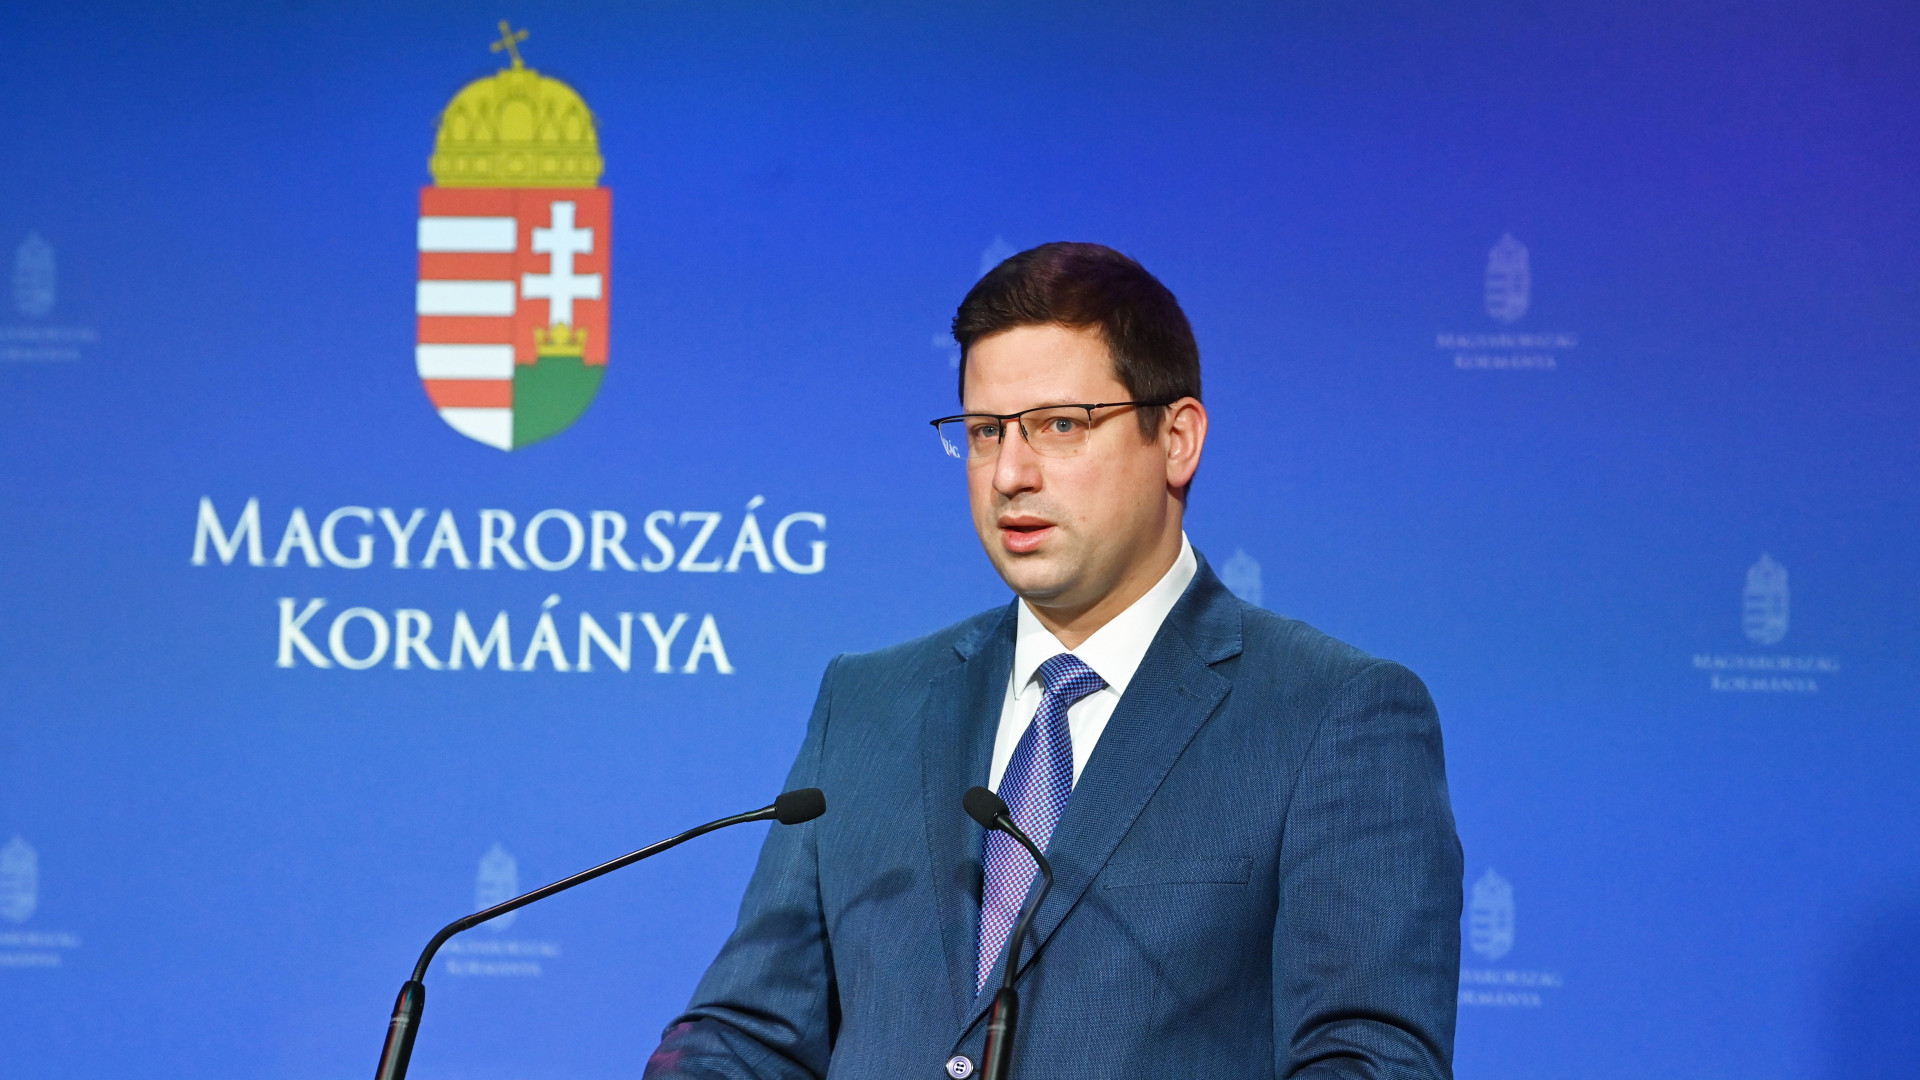 Should Hungary Scrap Utility Price Caps? - Gov't Rejects This EC Advice